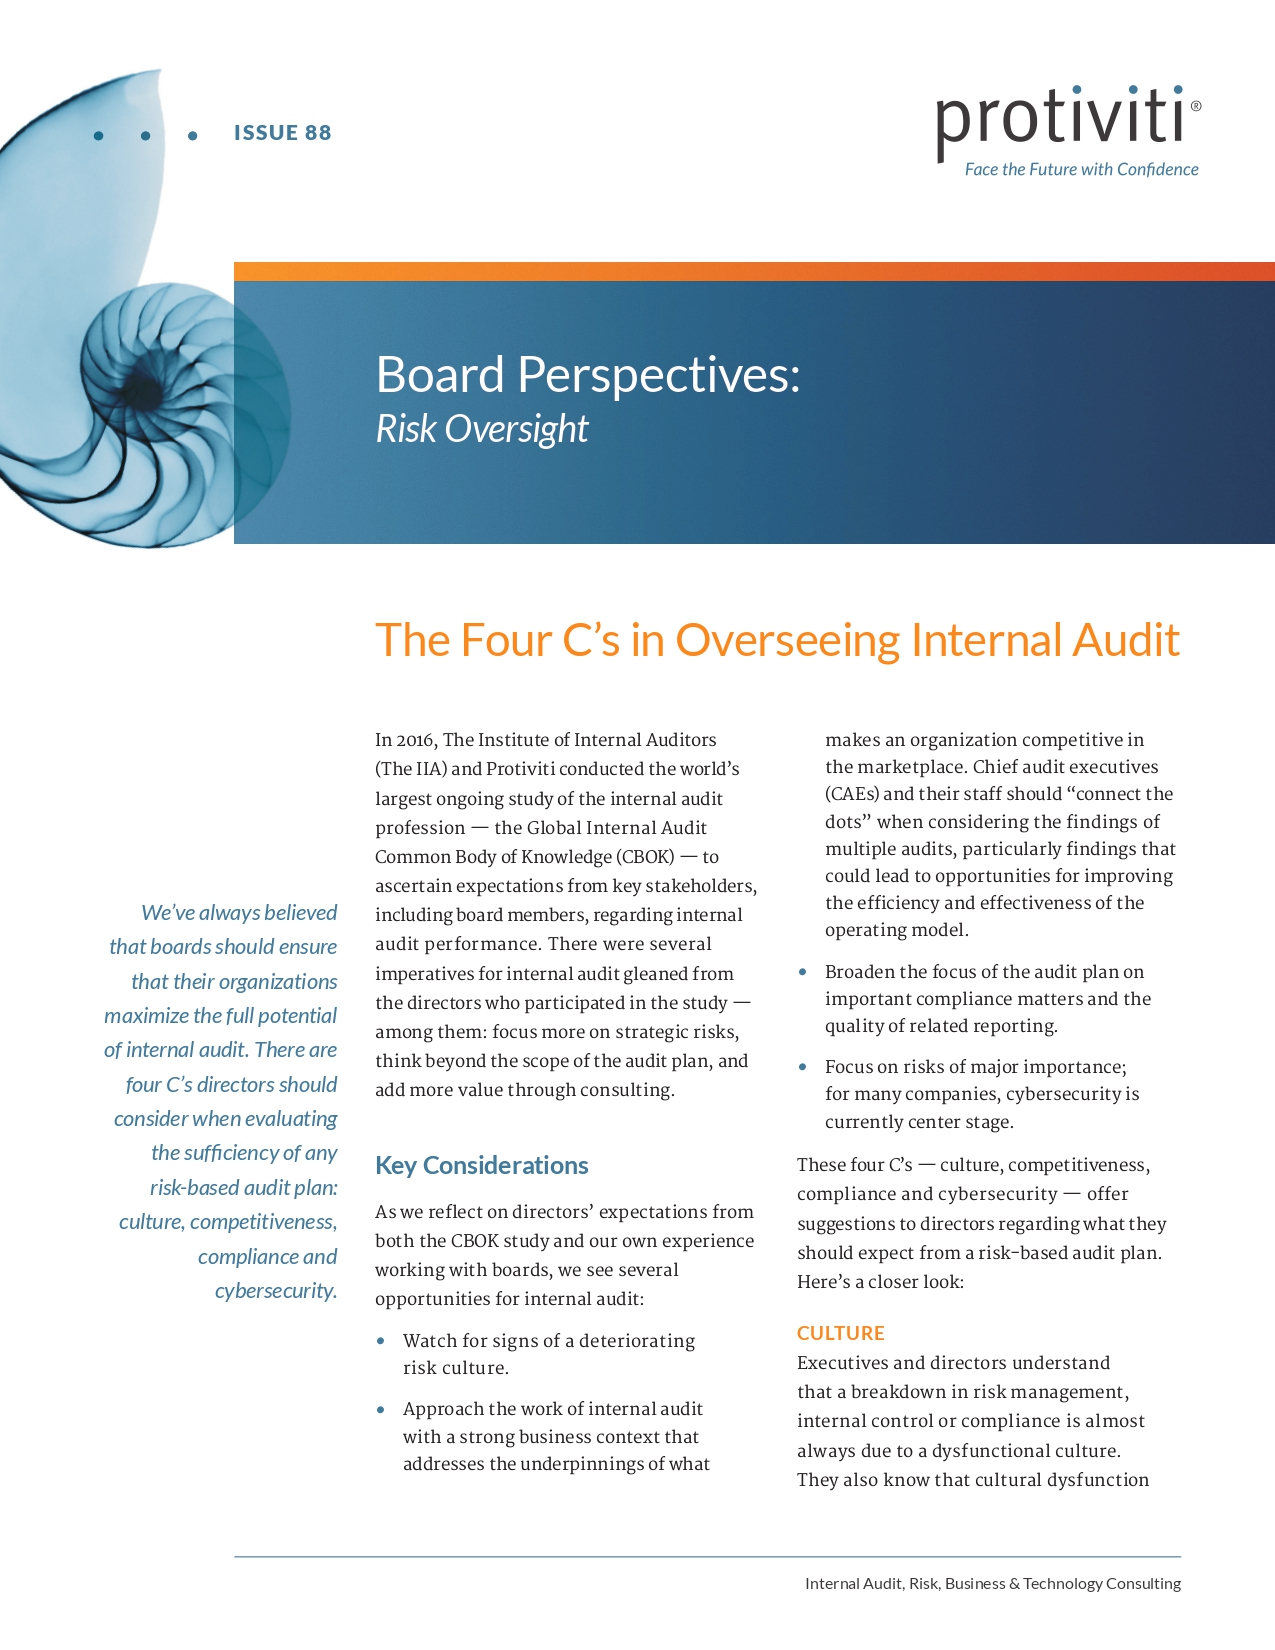 Screenshot of the first page of The Four C's in Overseeing Internal Audit